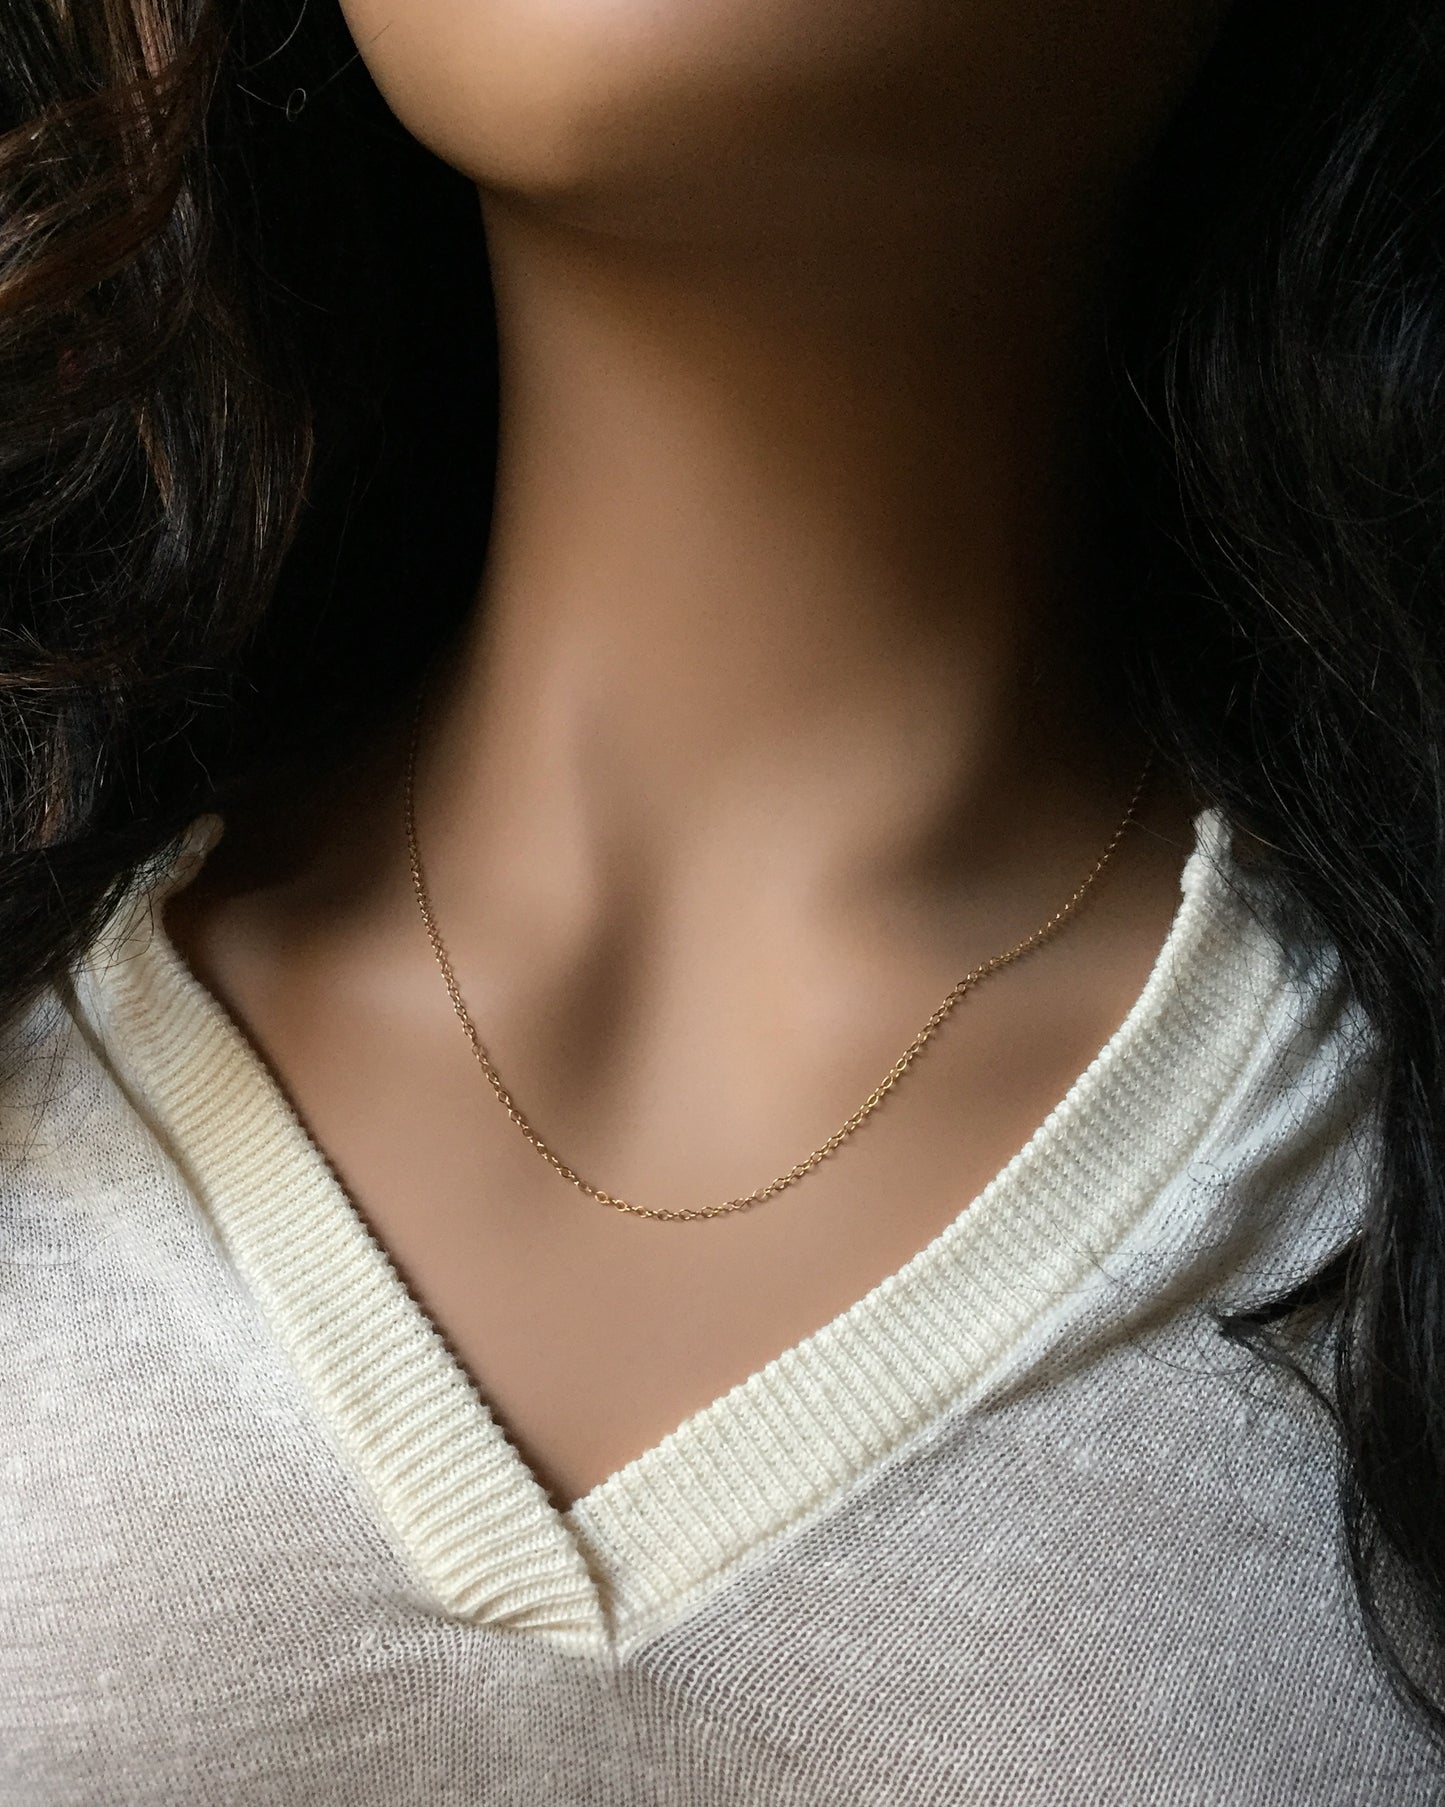 Dainty Thin Everyday Necklace | Plain Thin Chain Necklace | IB Jewelry